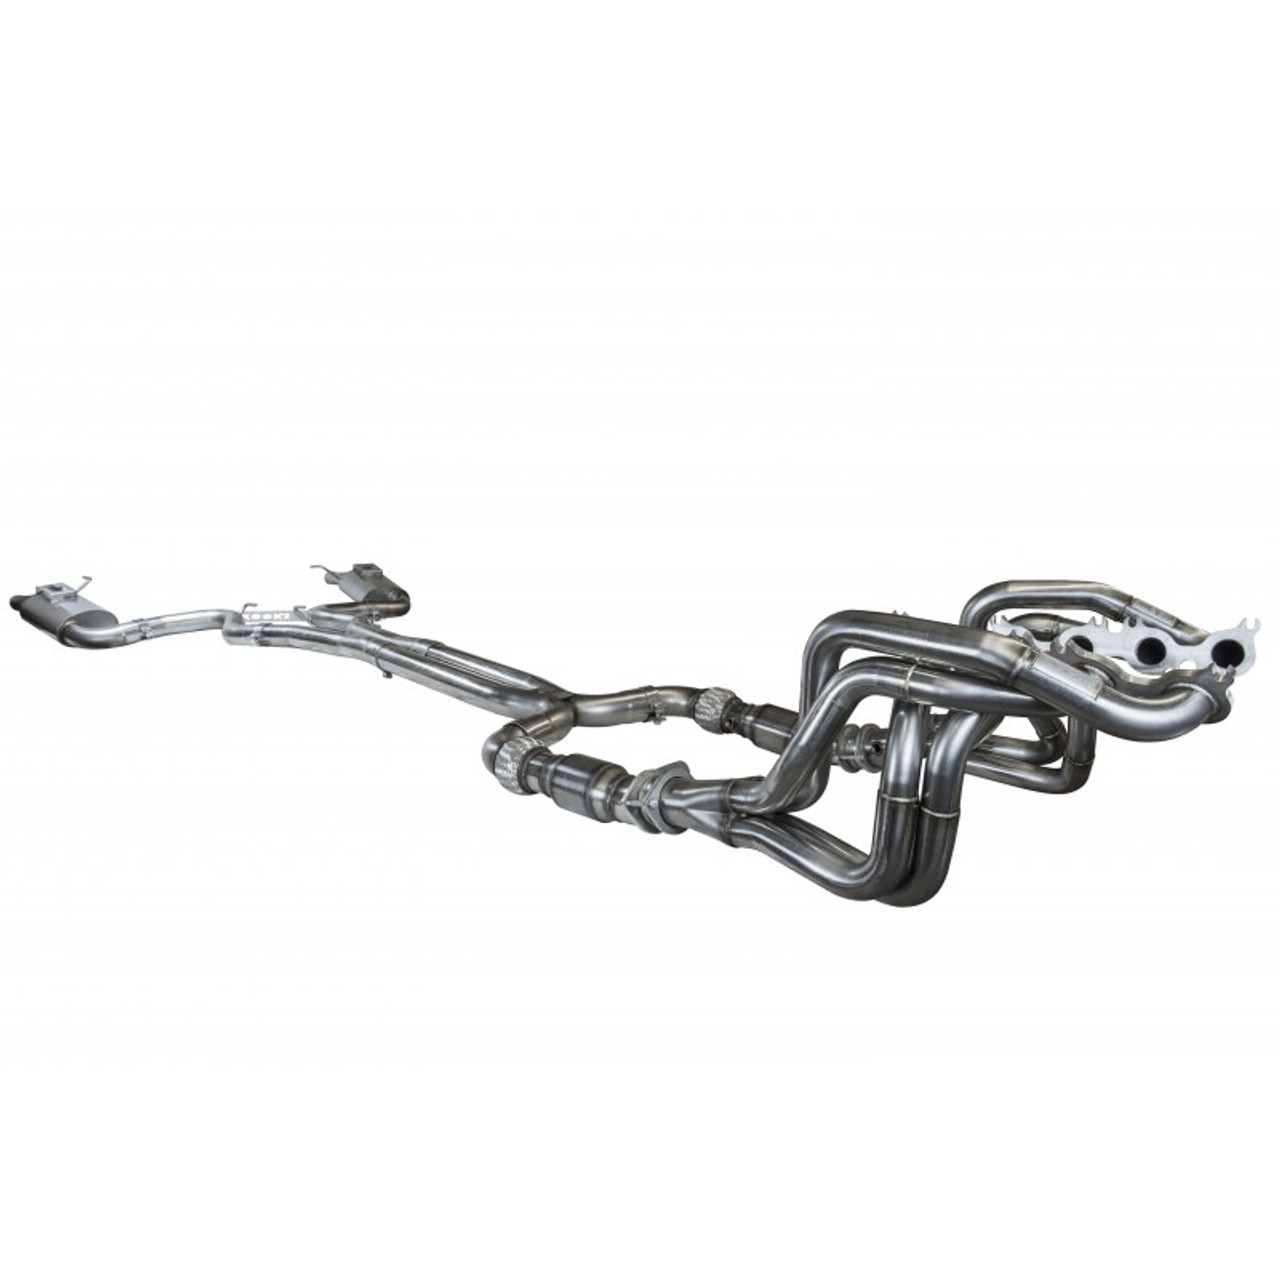 Kooks 1154F320 - Kooks 2015+ Ford Mustang GT350 5.2L Complete Competition Exhaust (Headers/Catted X-Pipe/Axle Back)